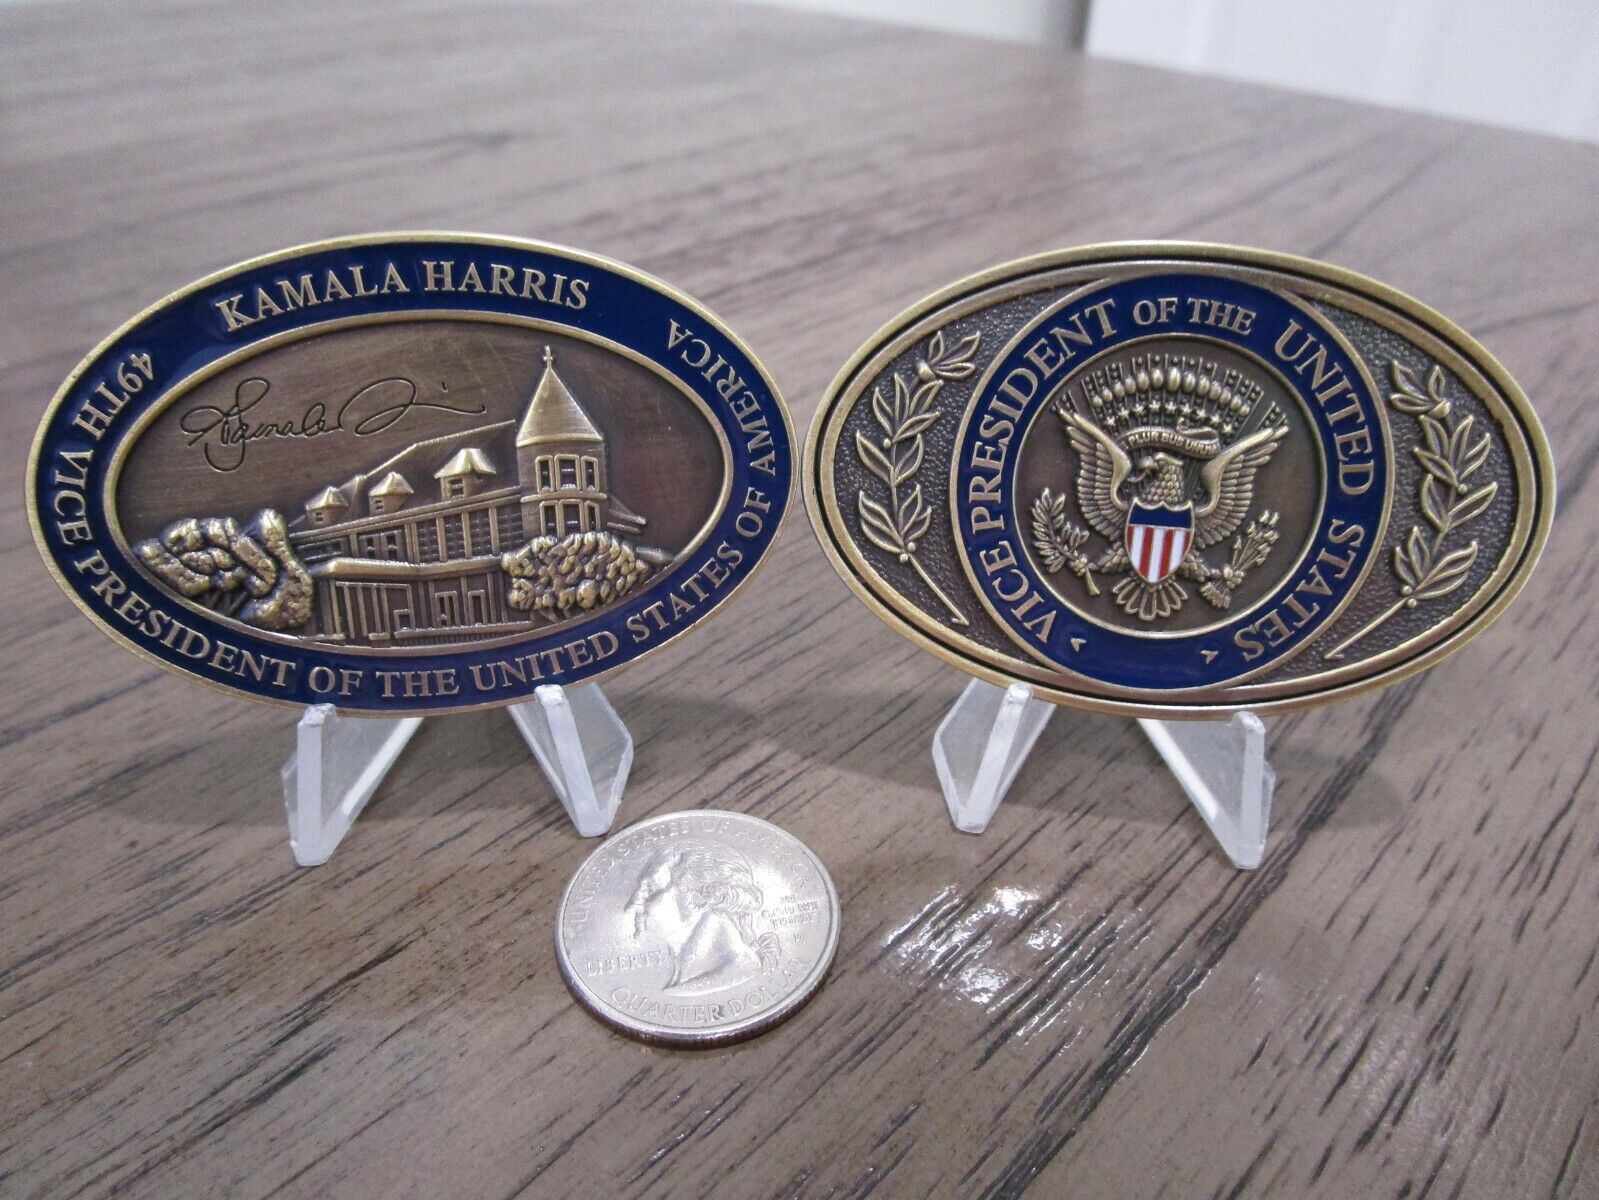 Vice President of the United States Kamala Harris Challenge Coin